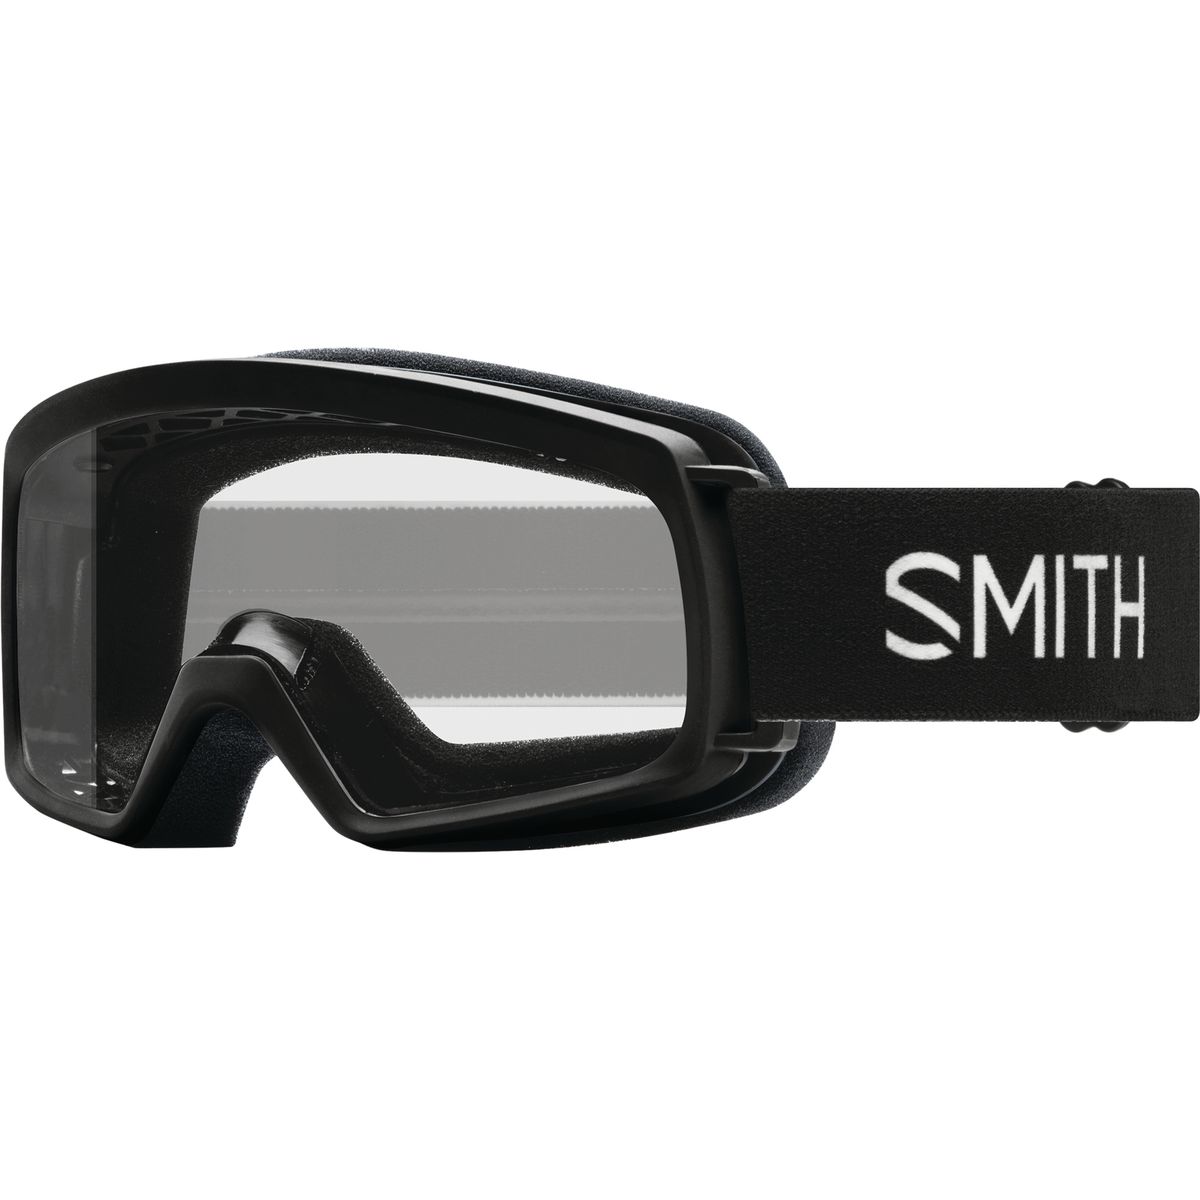 Smith Rascal Goggles - Kids' Black/Clear/No Extra Lens